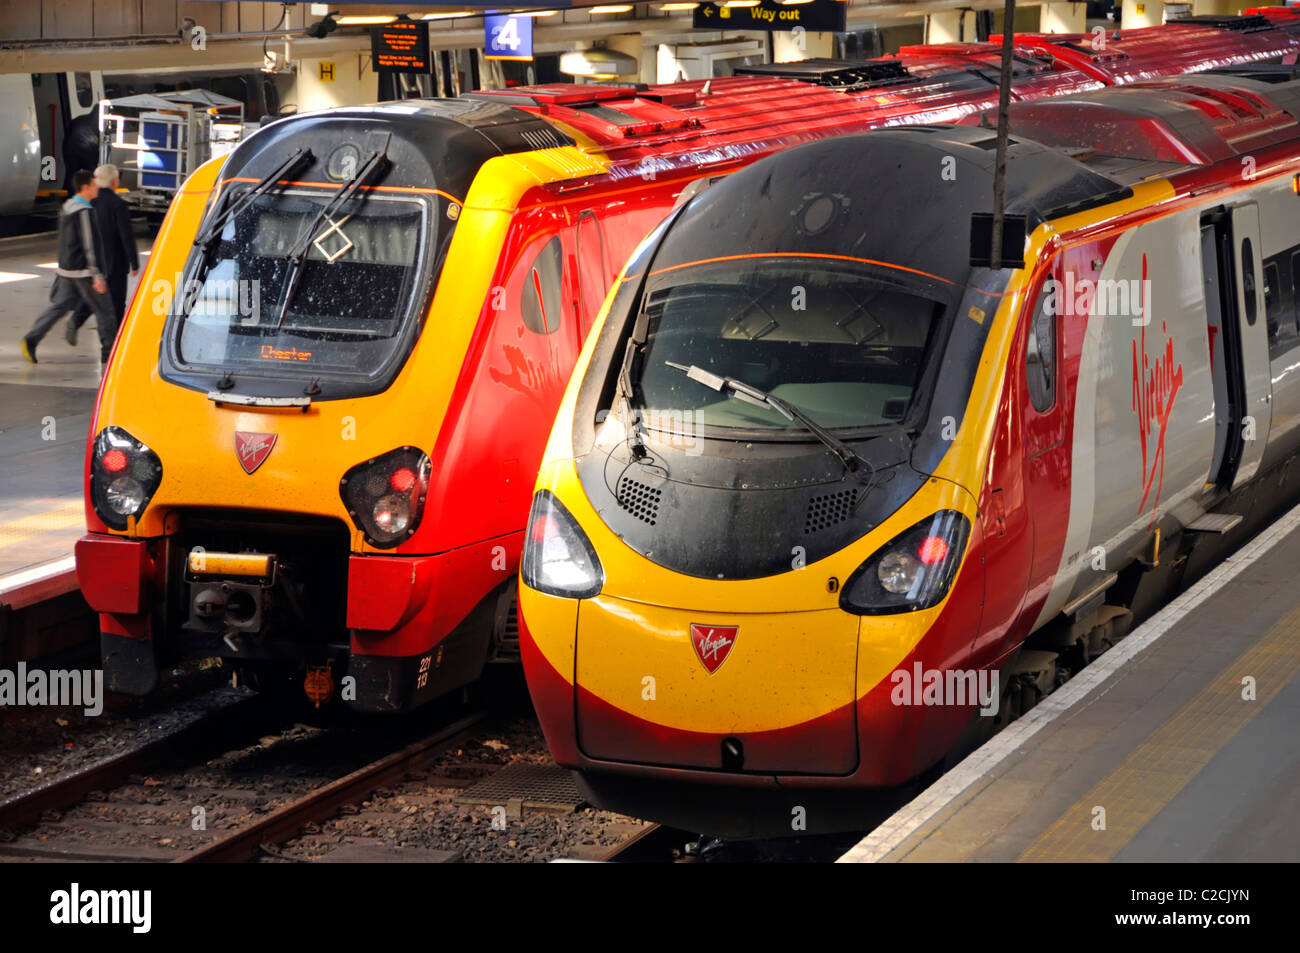 Two streamlined Virgin train units operated by Virgin Trains at Euston railway station platforms London England UK provide inter city public transport Stock Photo